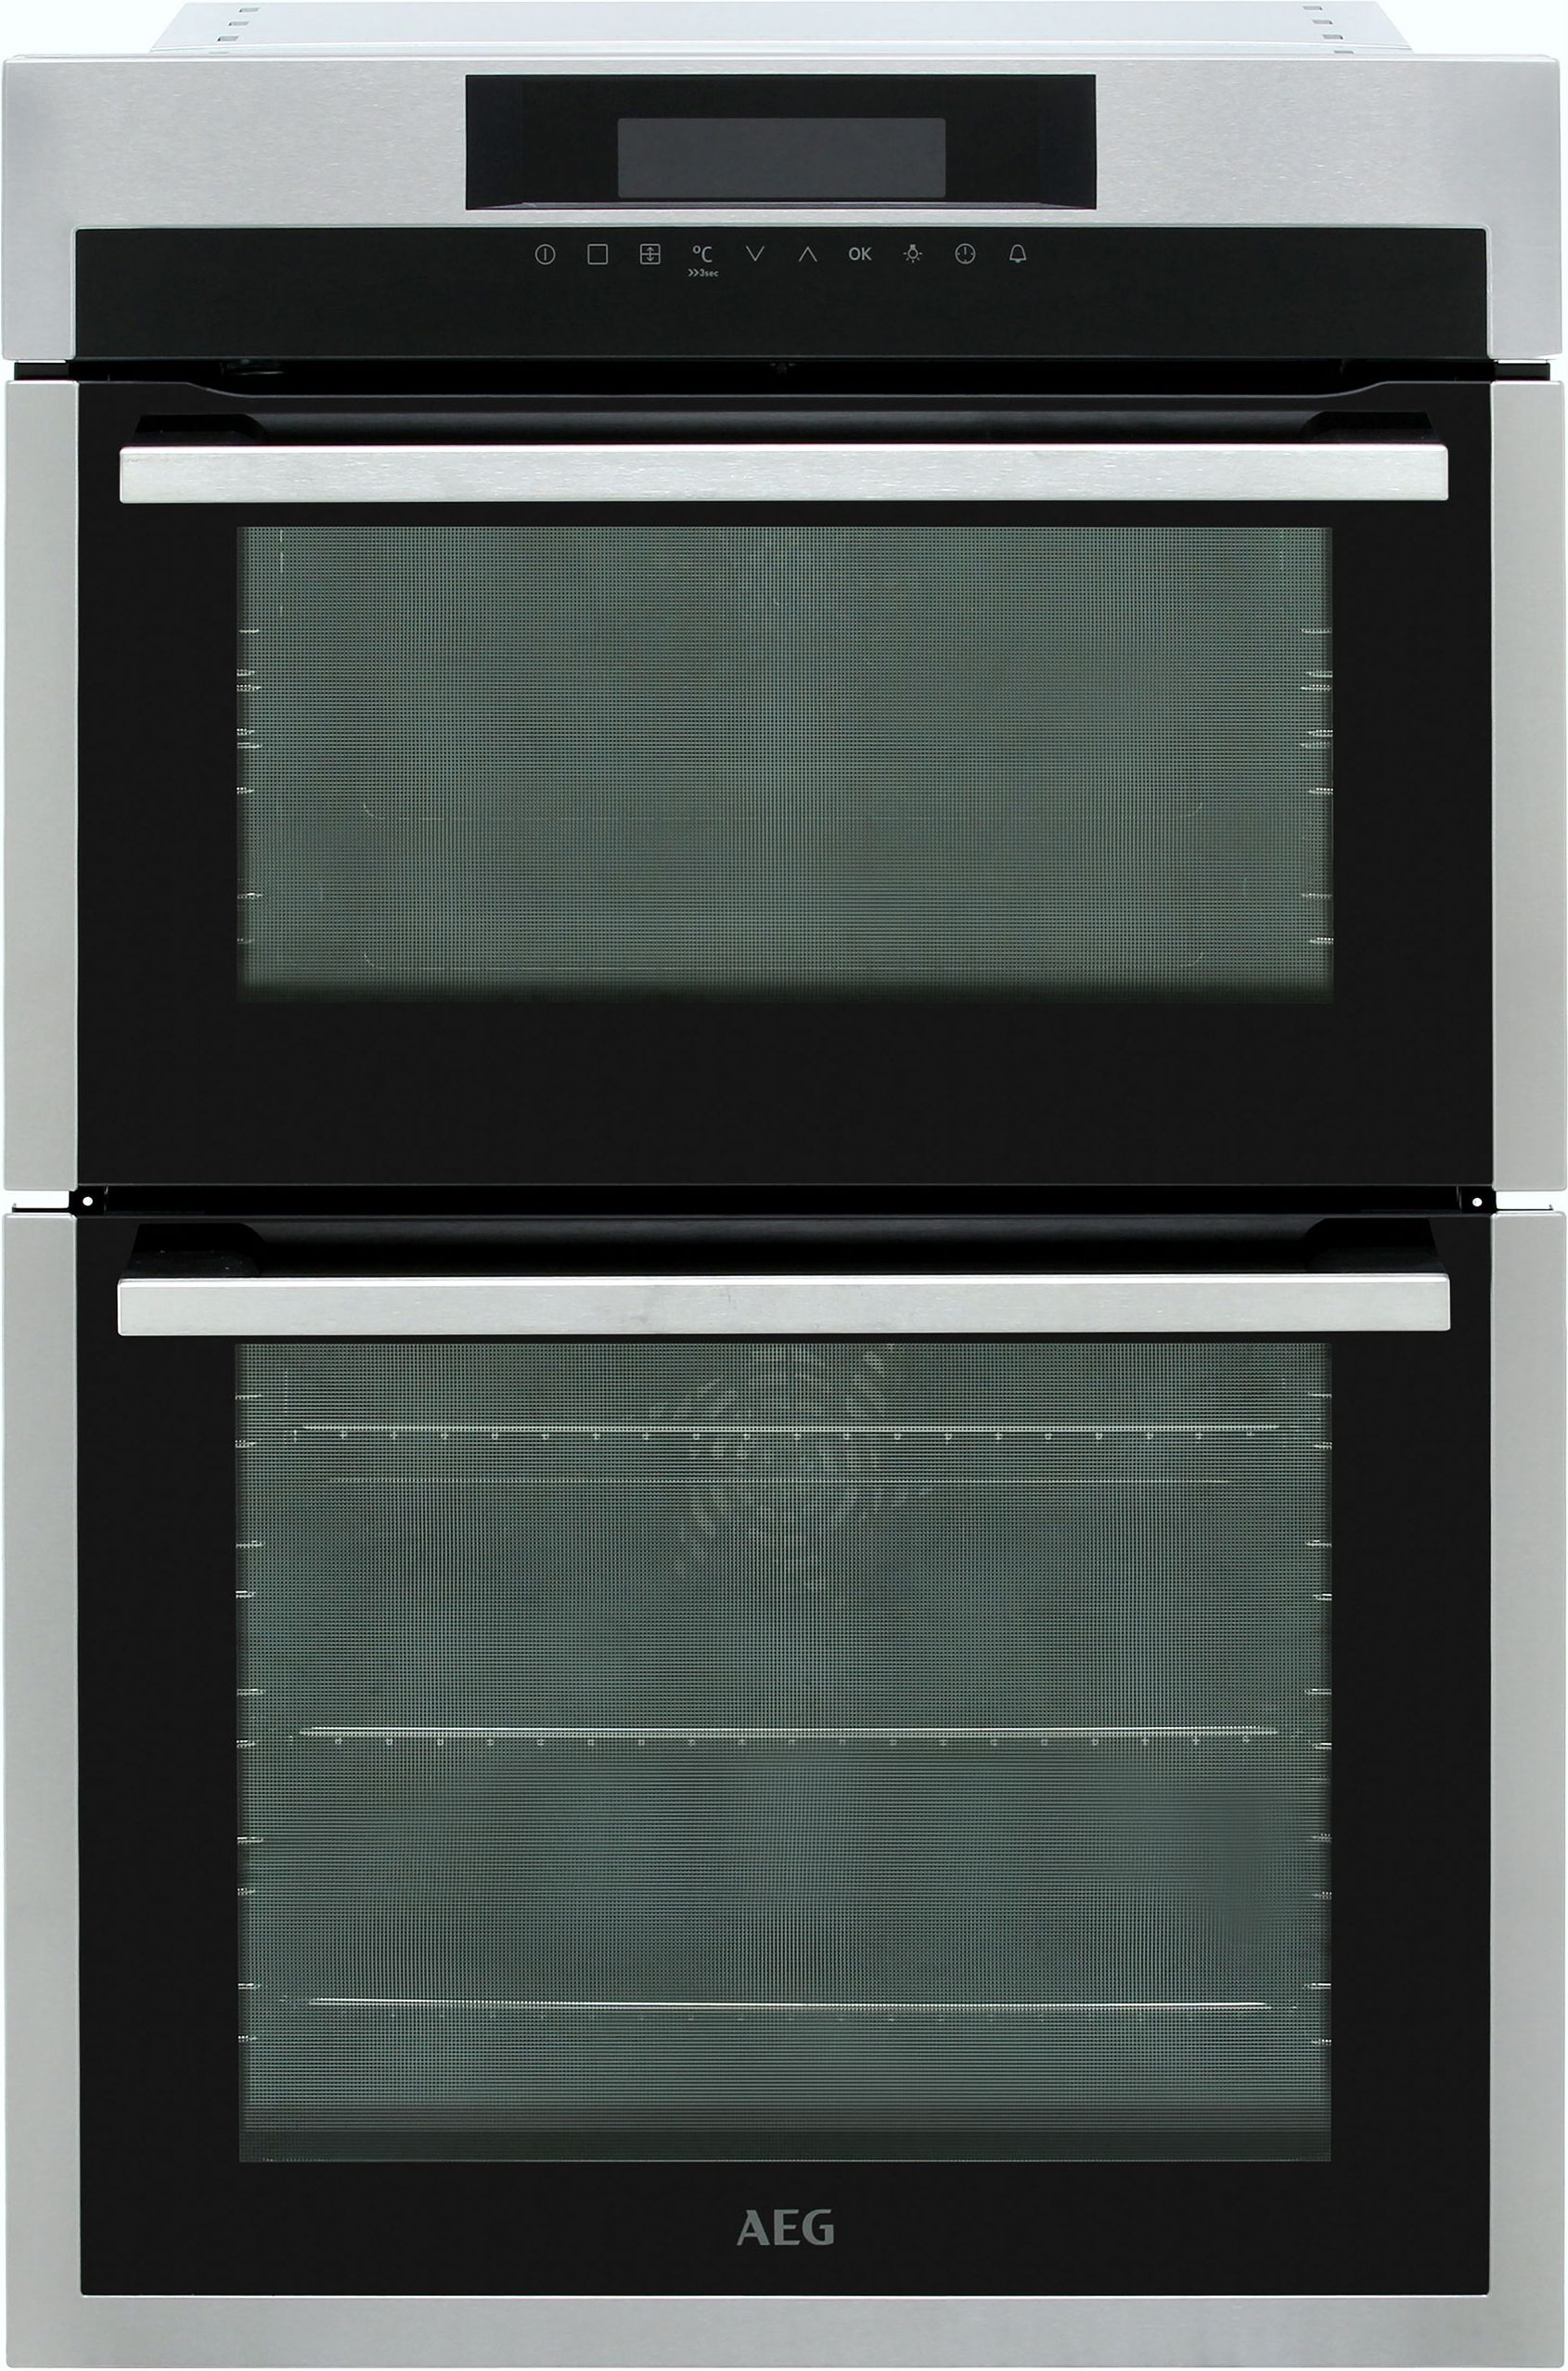 AEG DCE731110M Built In Electric Double Oven - Stainless Steel - A/A Rated, Stainless Steel